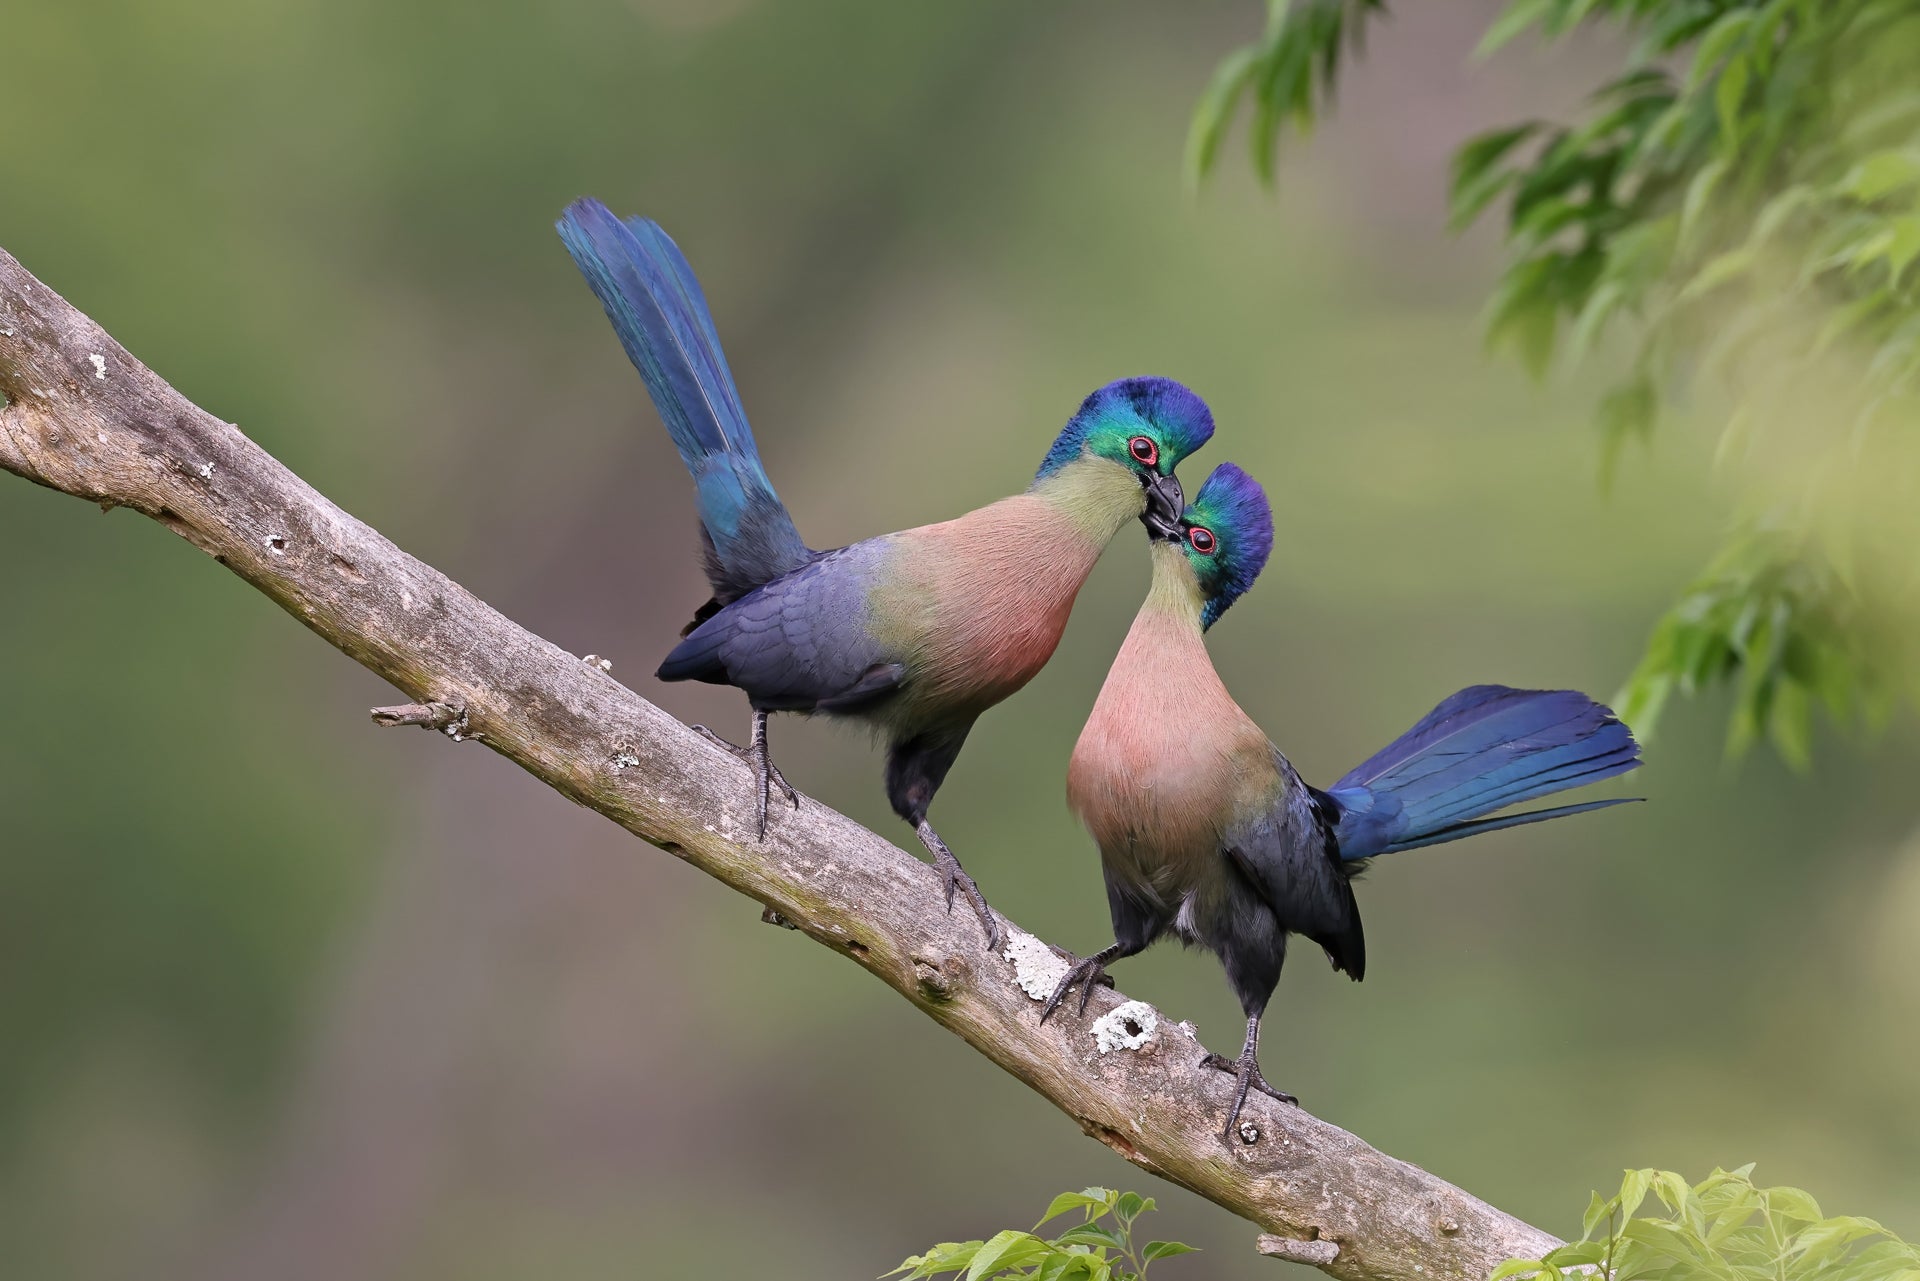 Two turacos share an intimate moment on a branch. (Photo: Richard Flack)